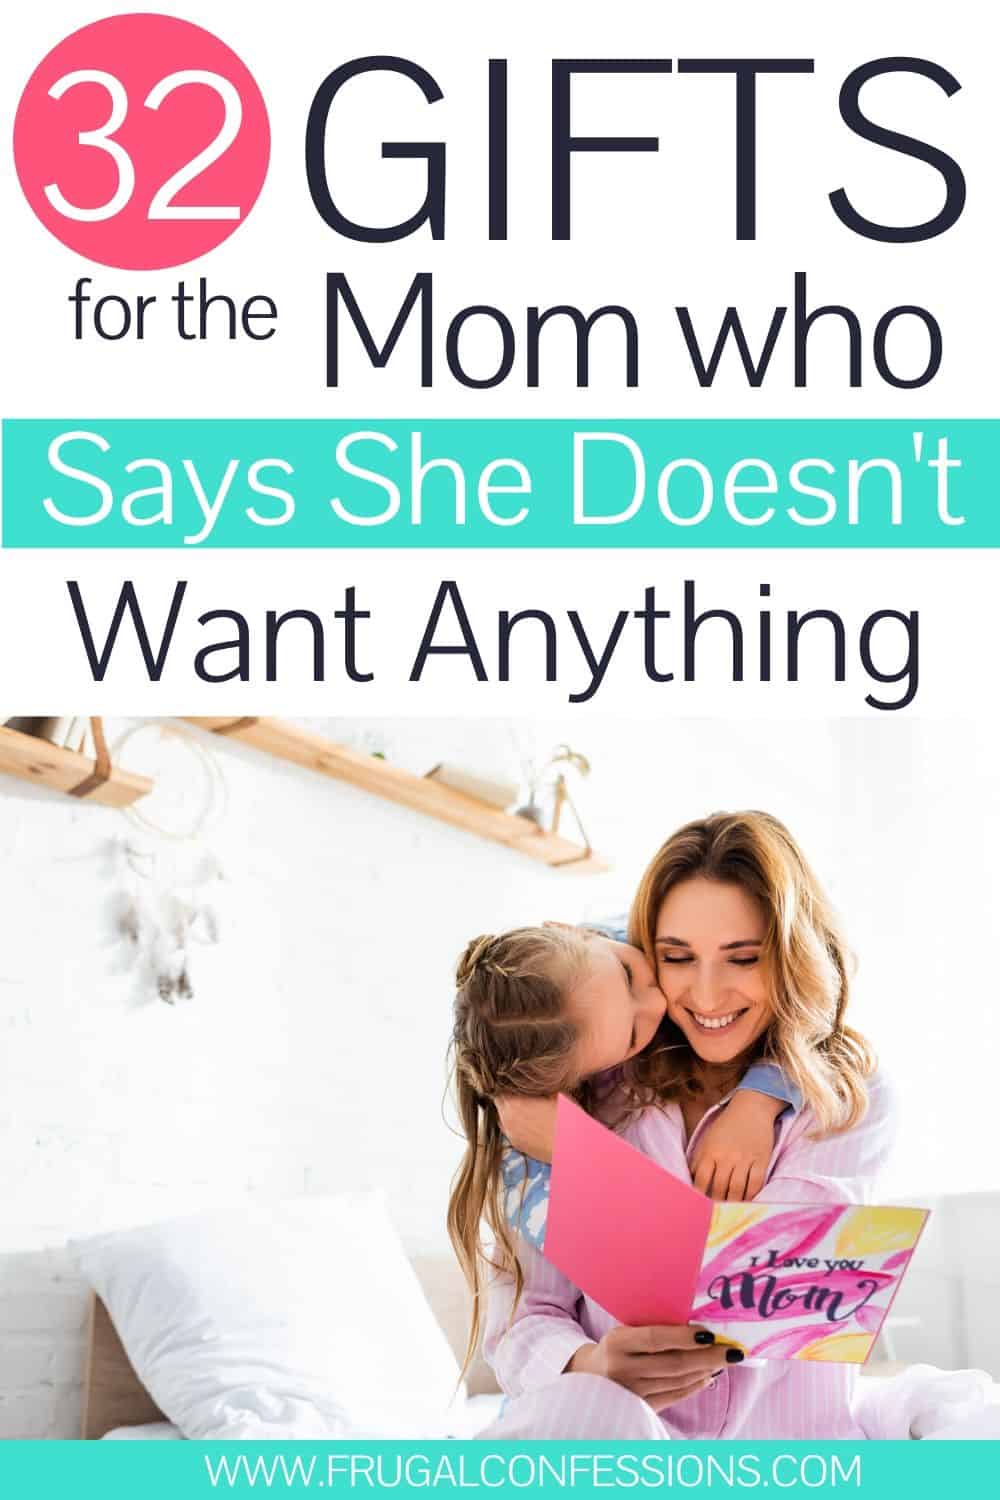 Mom being hugged by daughter, text overlay "32 gifts for the Mom who says she doesn't want anything"